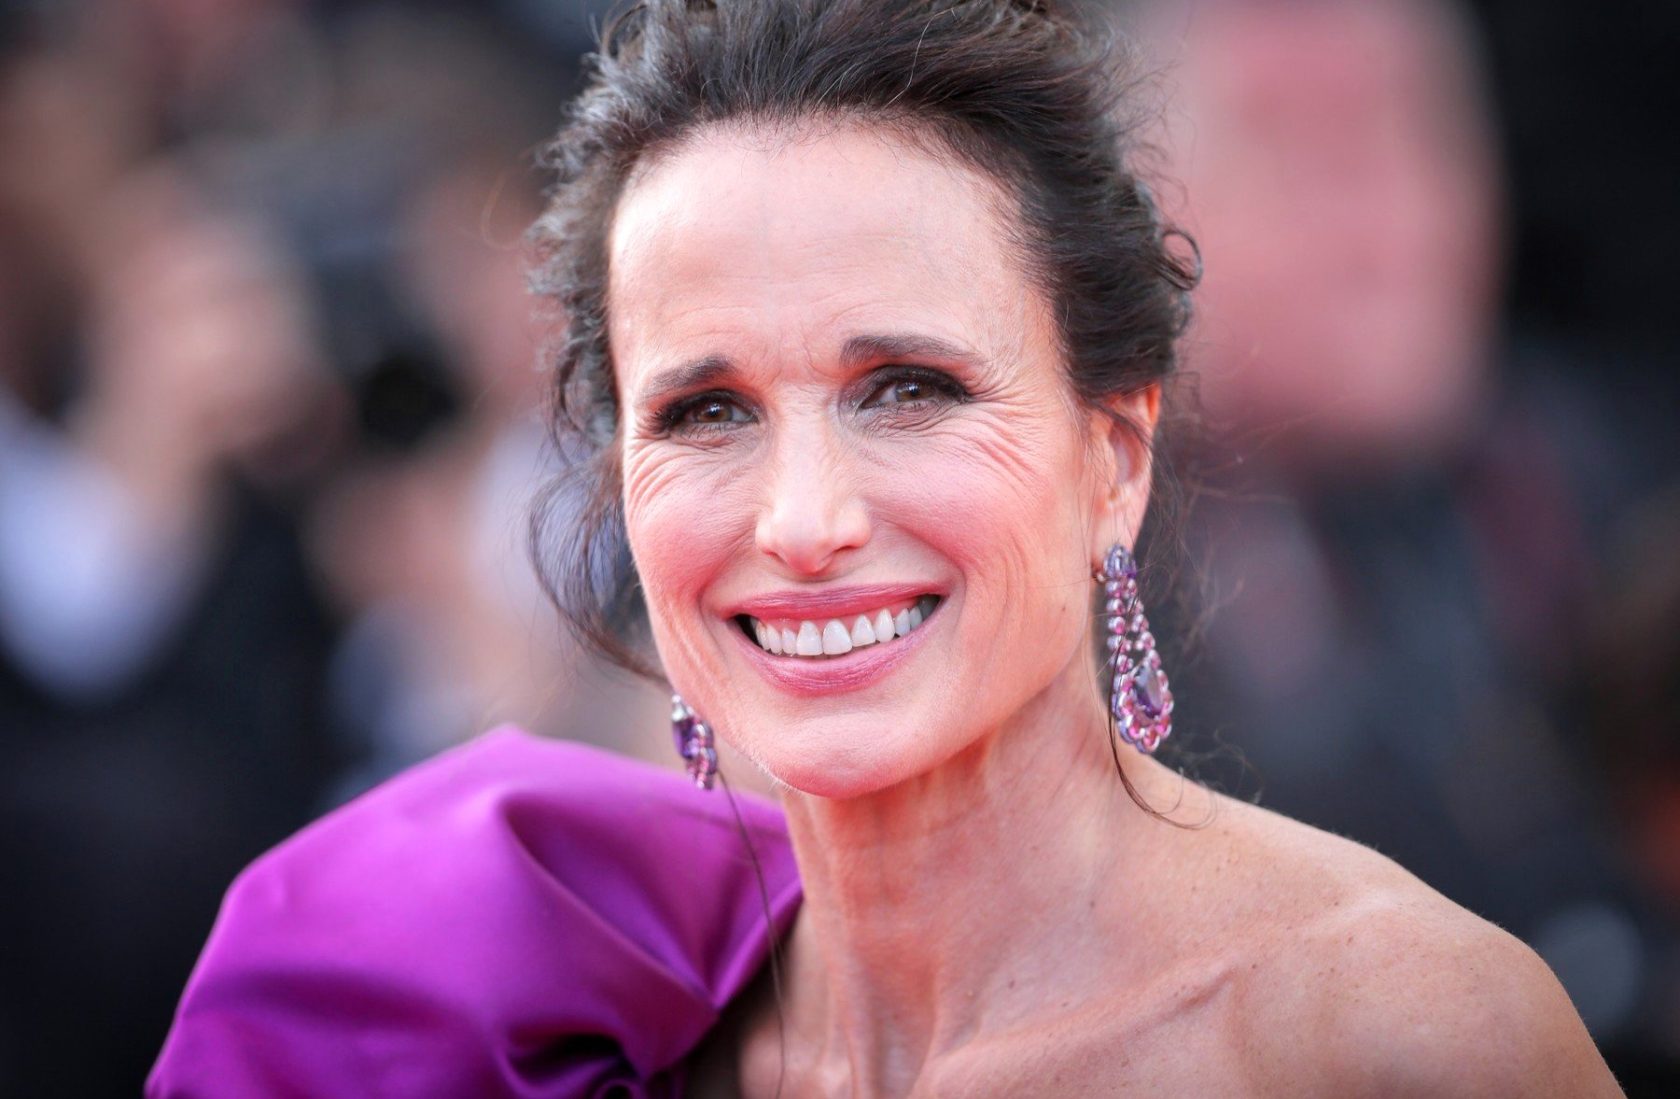 Andie MacDowell attends the 'The Meyerowitz Stories' screening during the 70th annual Cannes Film Festival at Palais des Festivals on May 21, 2017 in Cannes, France, Image: 333108729, License: Rights-managed, Restrictions: Worldwide rights, Model Release: no, Credit line: Profimedia, Crystal pictures